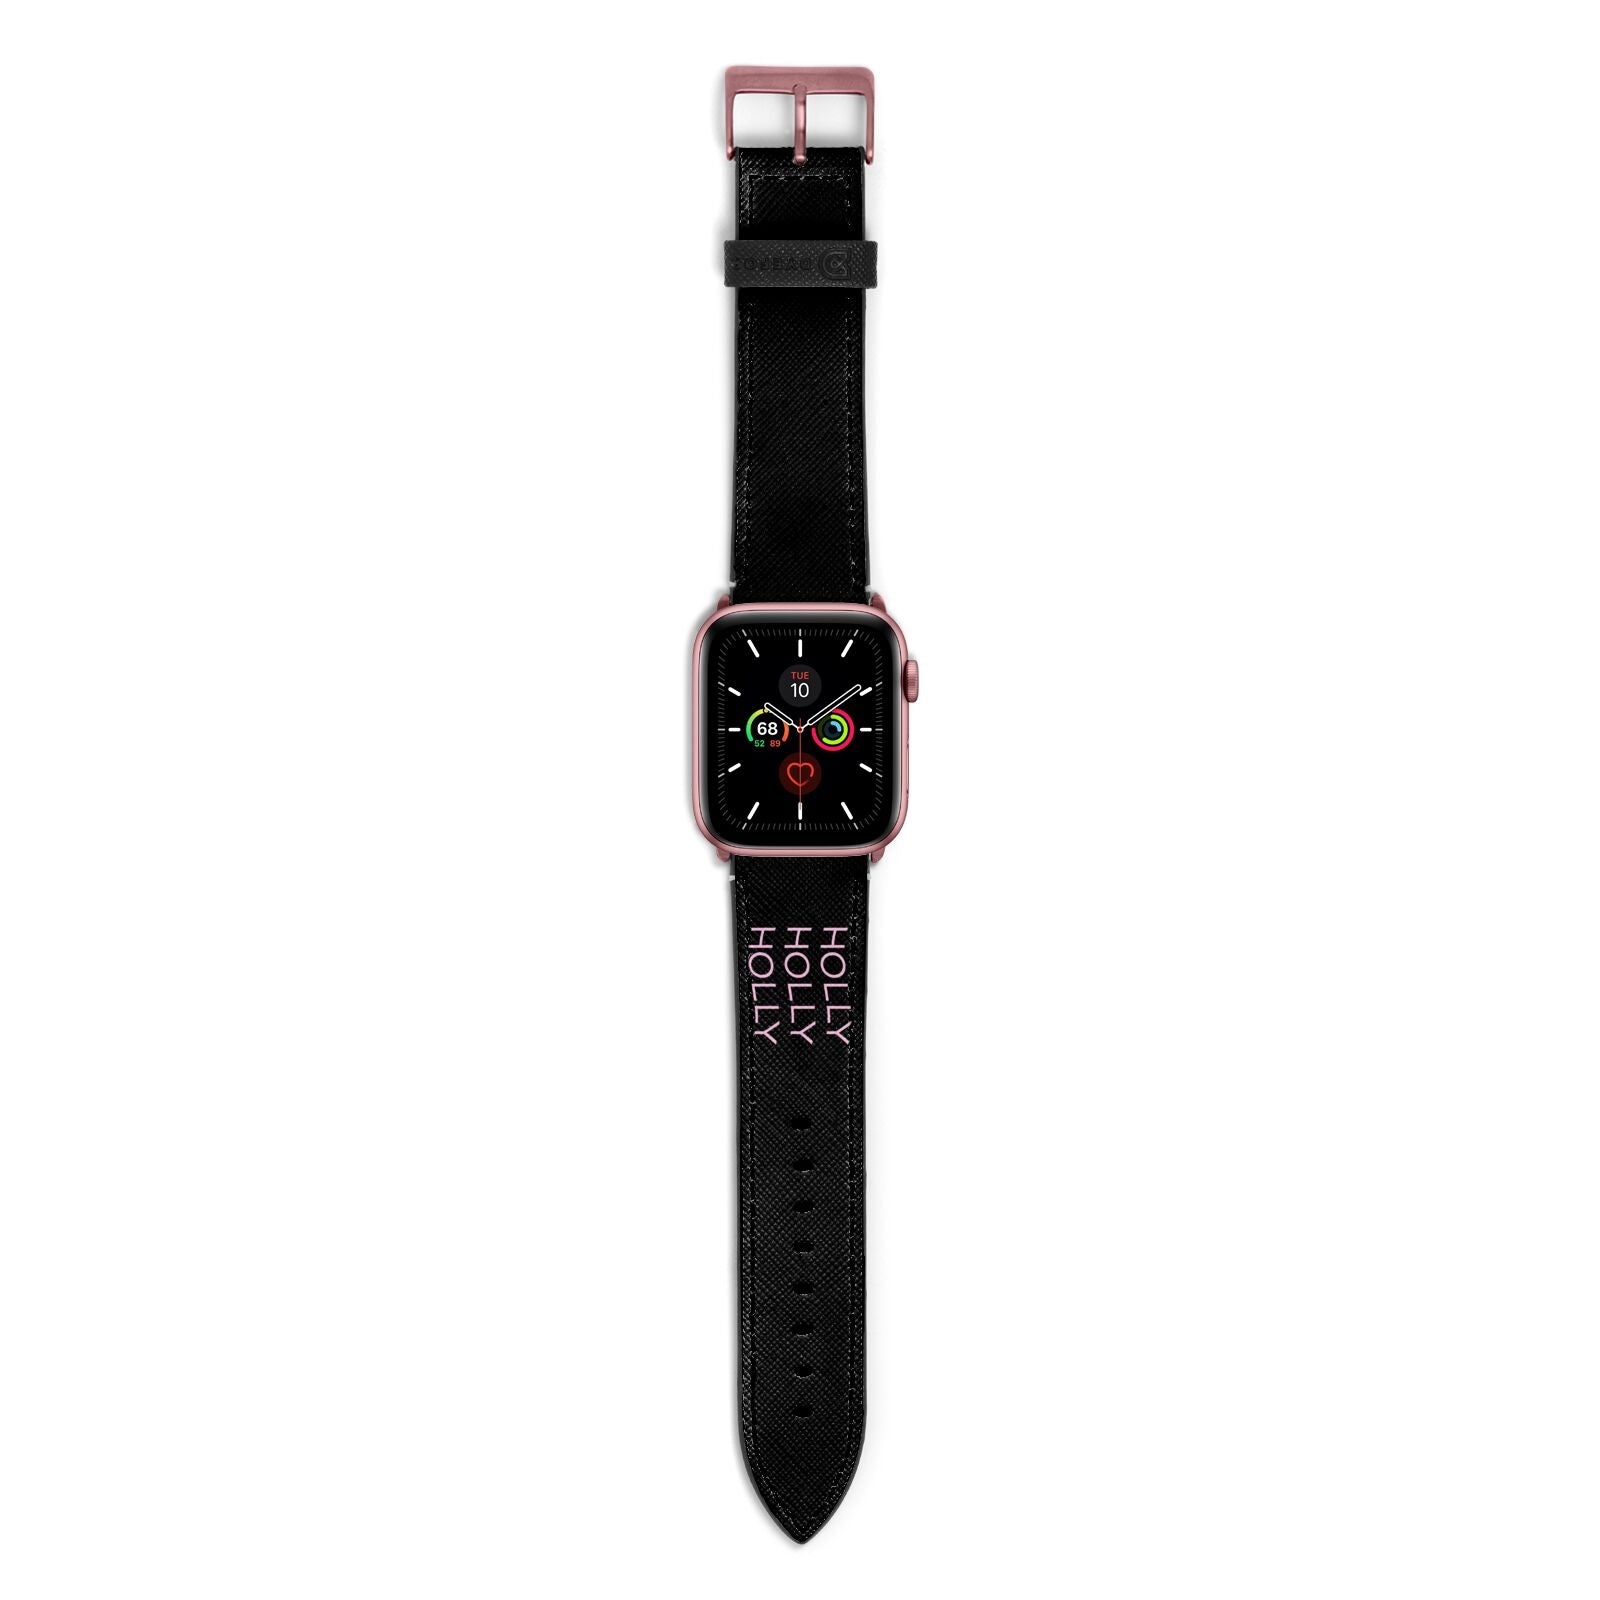 Wavy Name Apple Watch Strap with Rose Gold Hardware